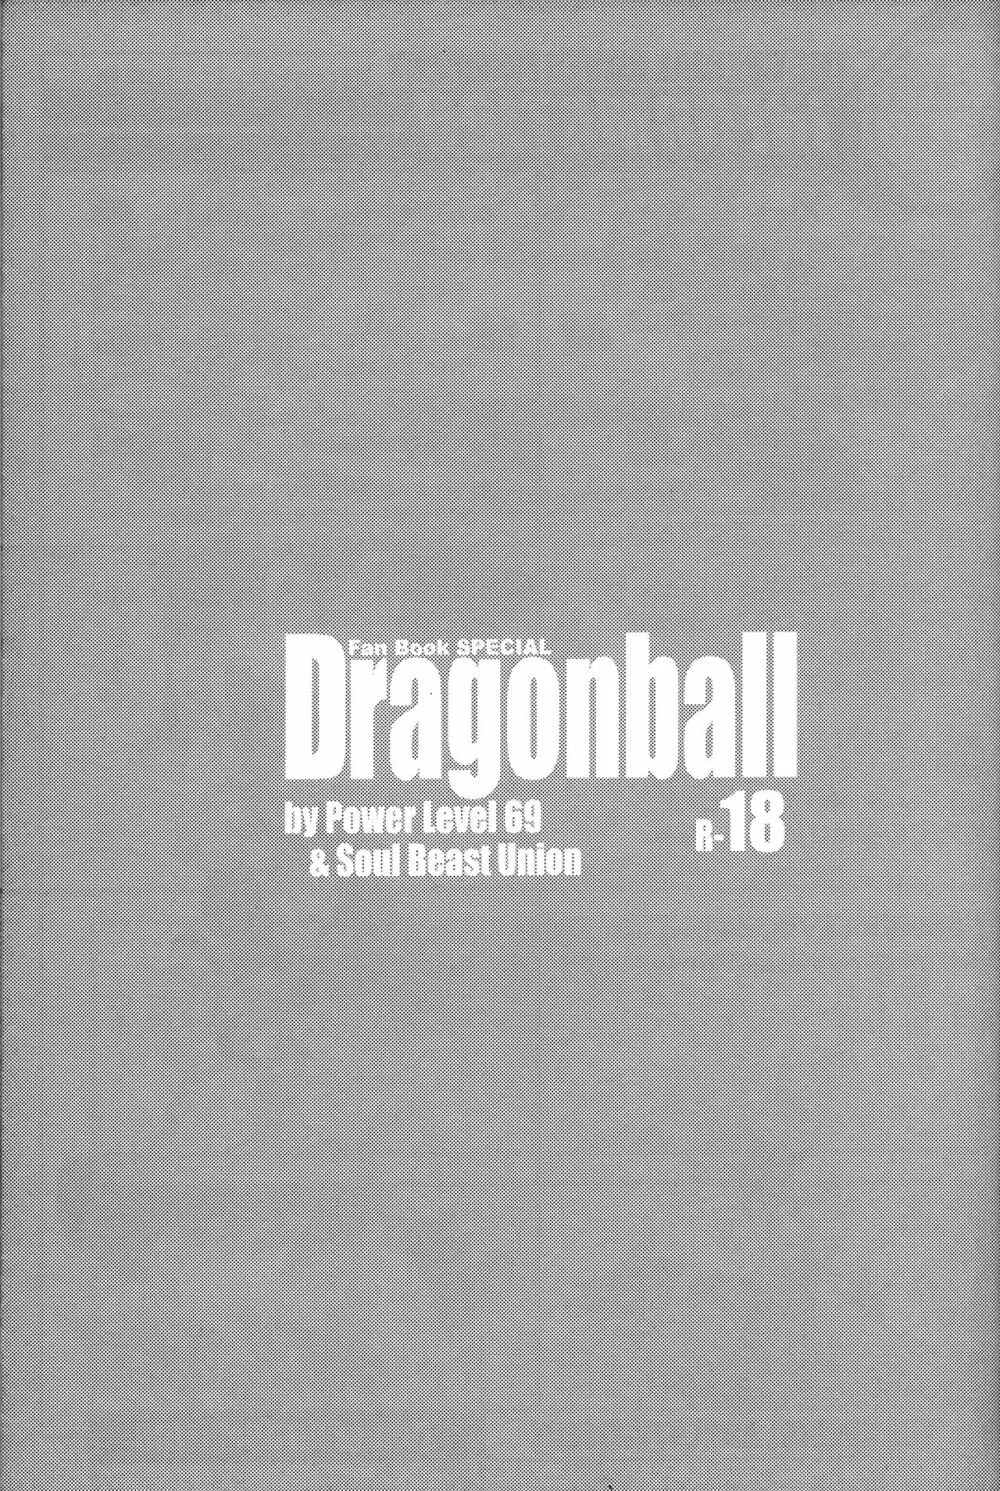 Dragonball Fan Book SPECIAL Page.4